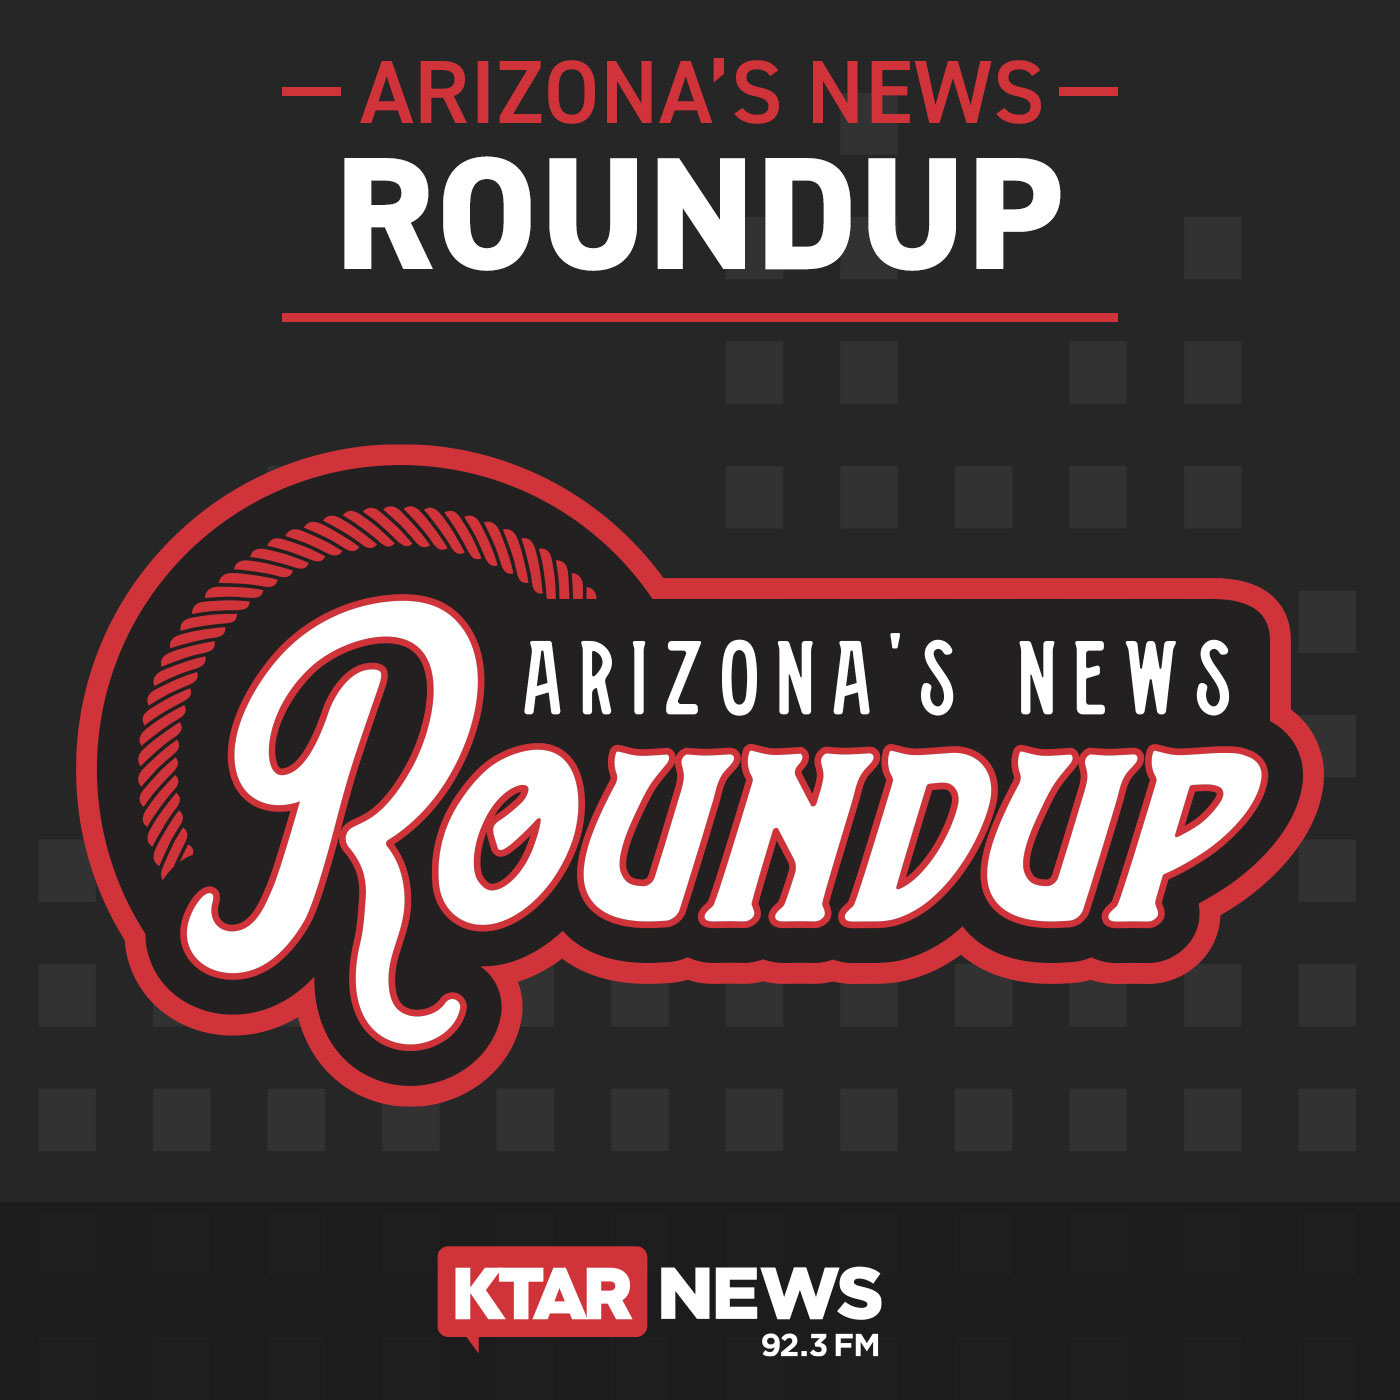 Arizona's News Roundup: Two cyclists killed and multiple injured after truck plows through group, Gov. Hobbs visits Yuma border